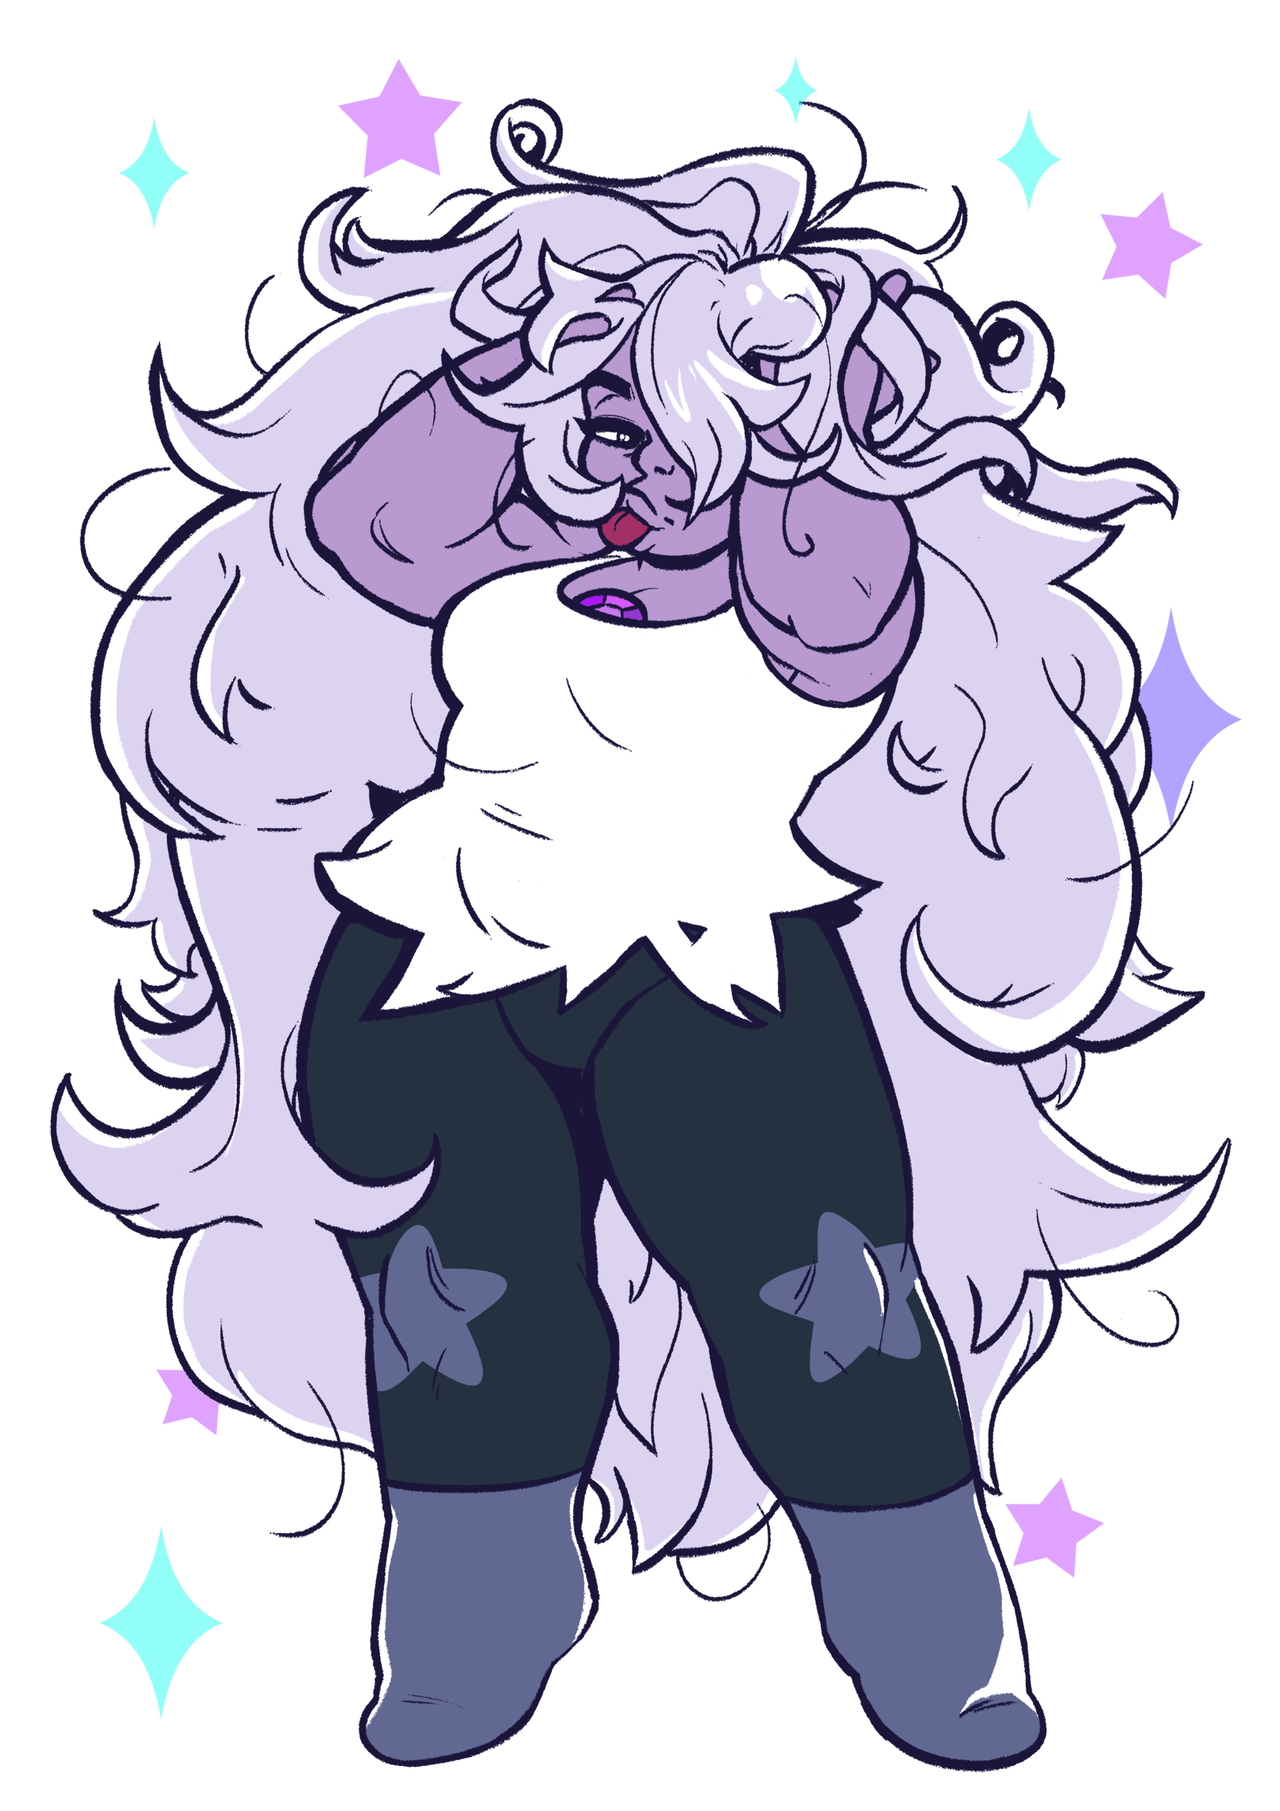 The fluffiest Amethyst my hands can make